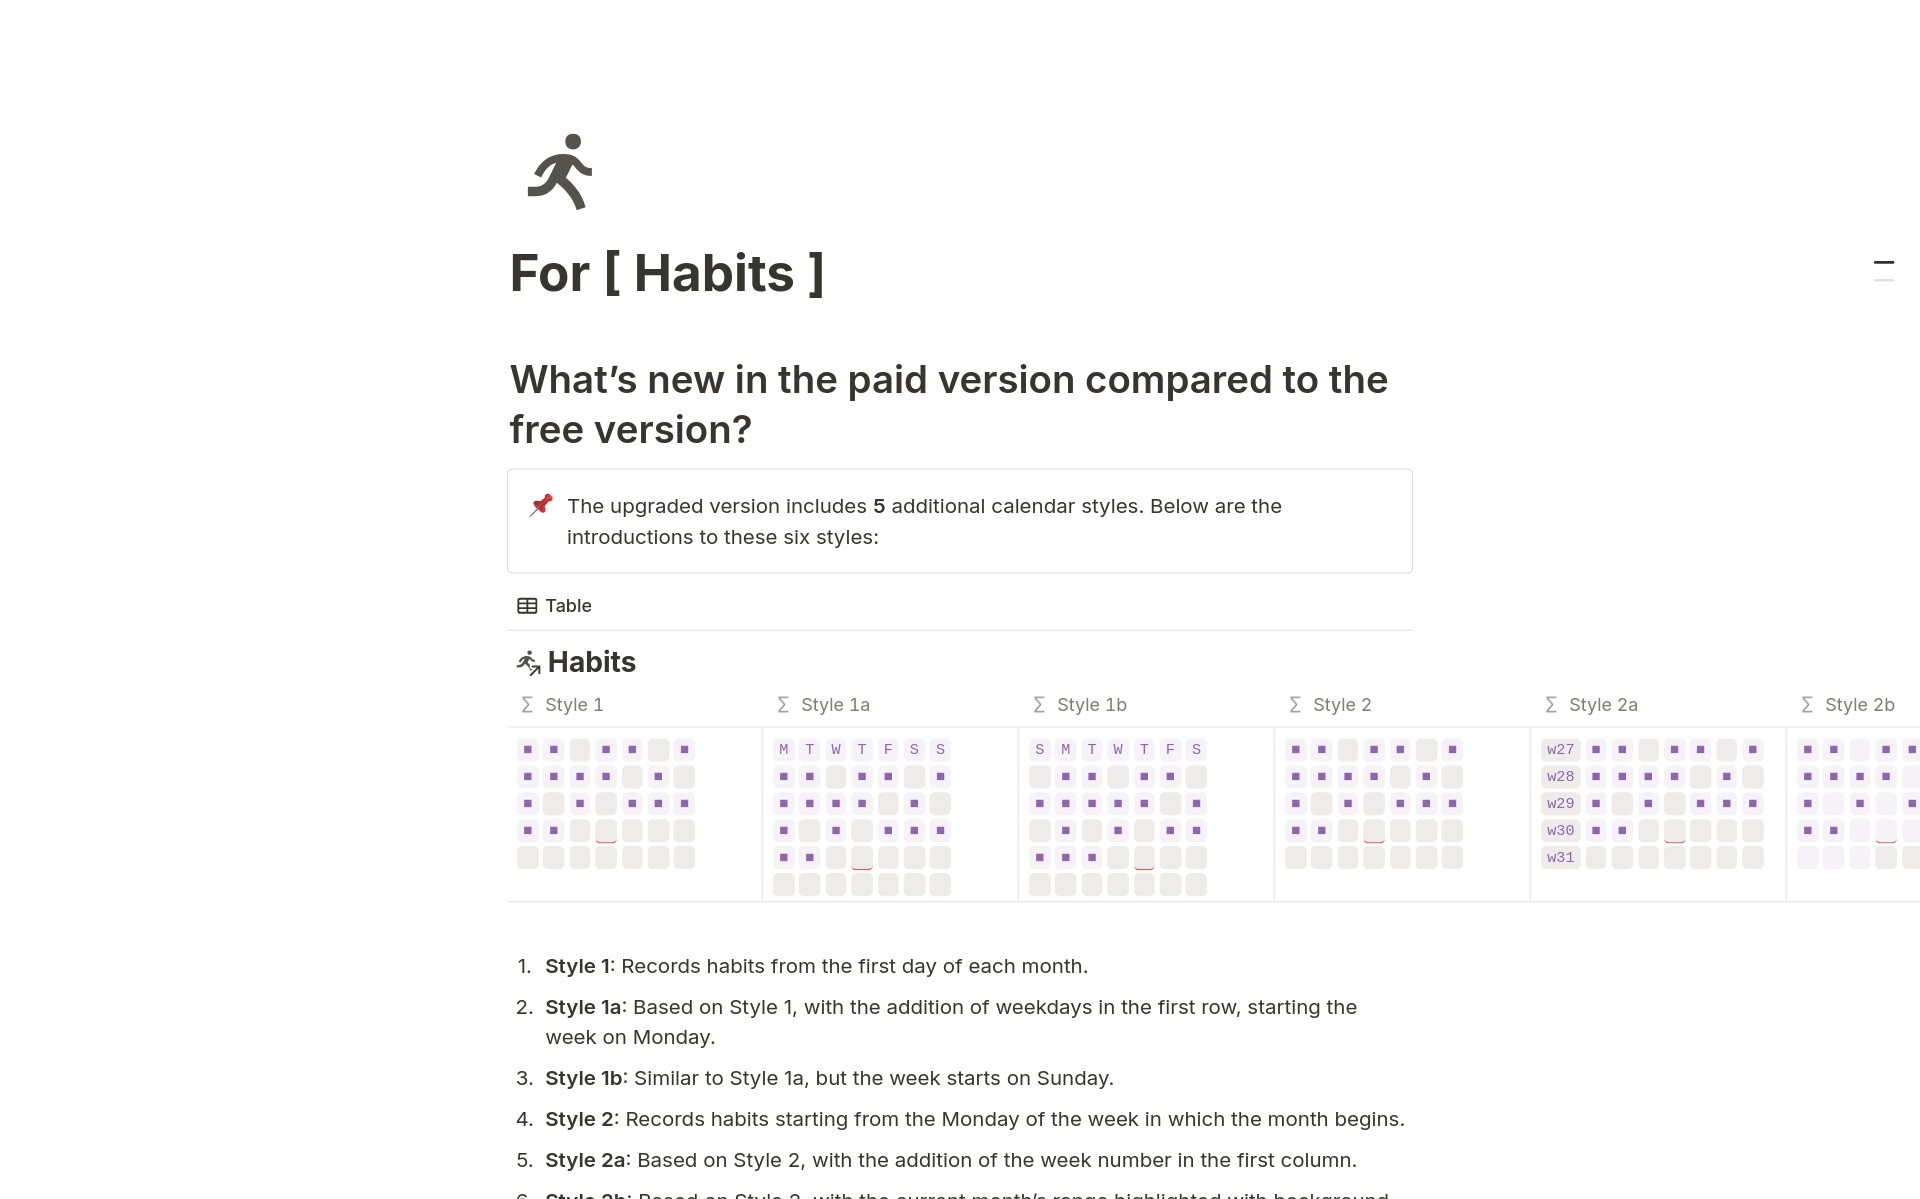 Experience an advanced, visually engaging way to track your habits with our premium version of the Formula-Powered Habit Tracker, now with an added YEARLY HEATMAP.